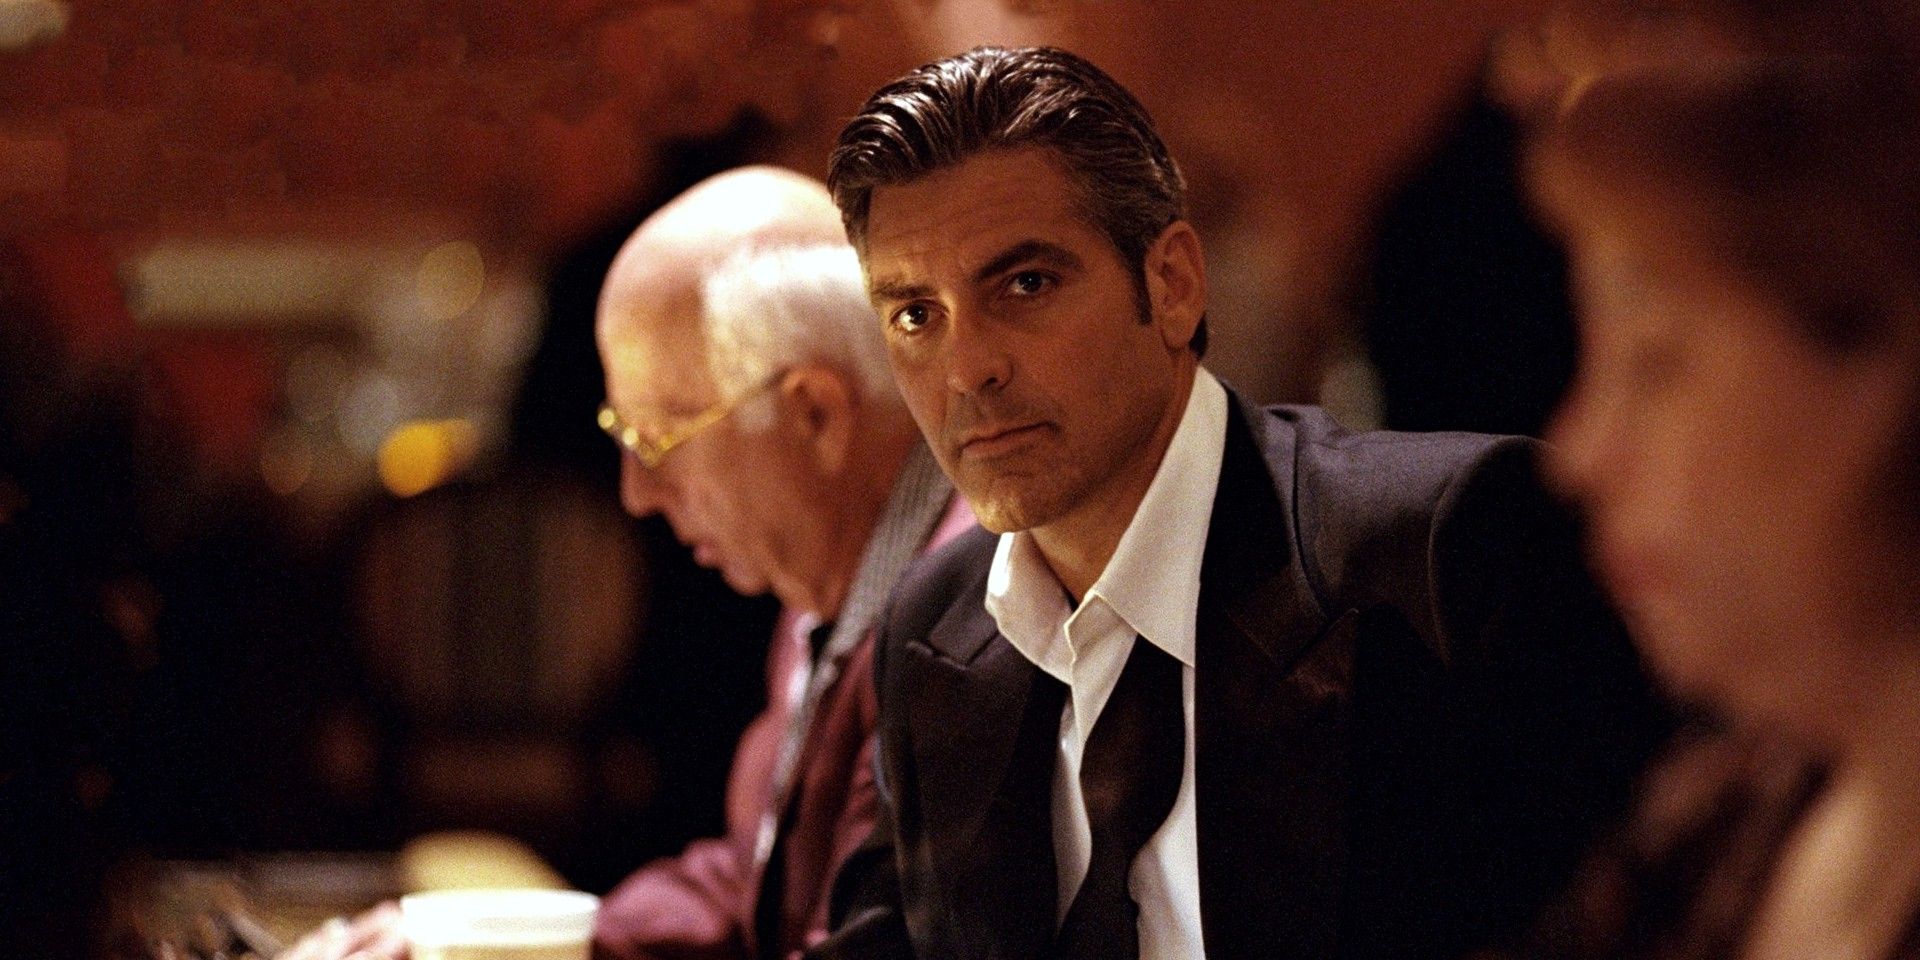 Danny sitting at a card table in Ocean's Eleven